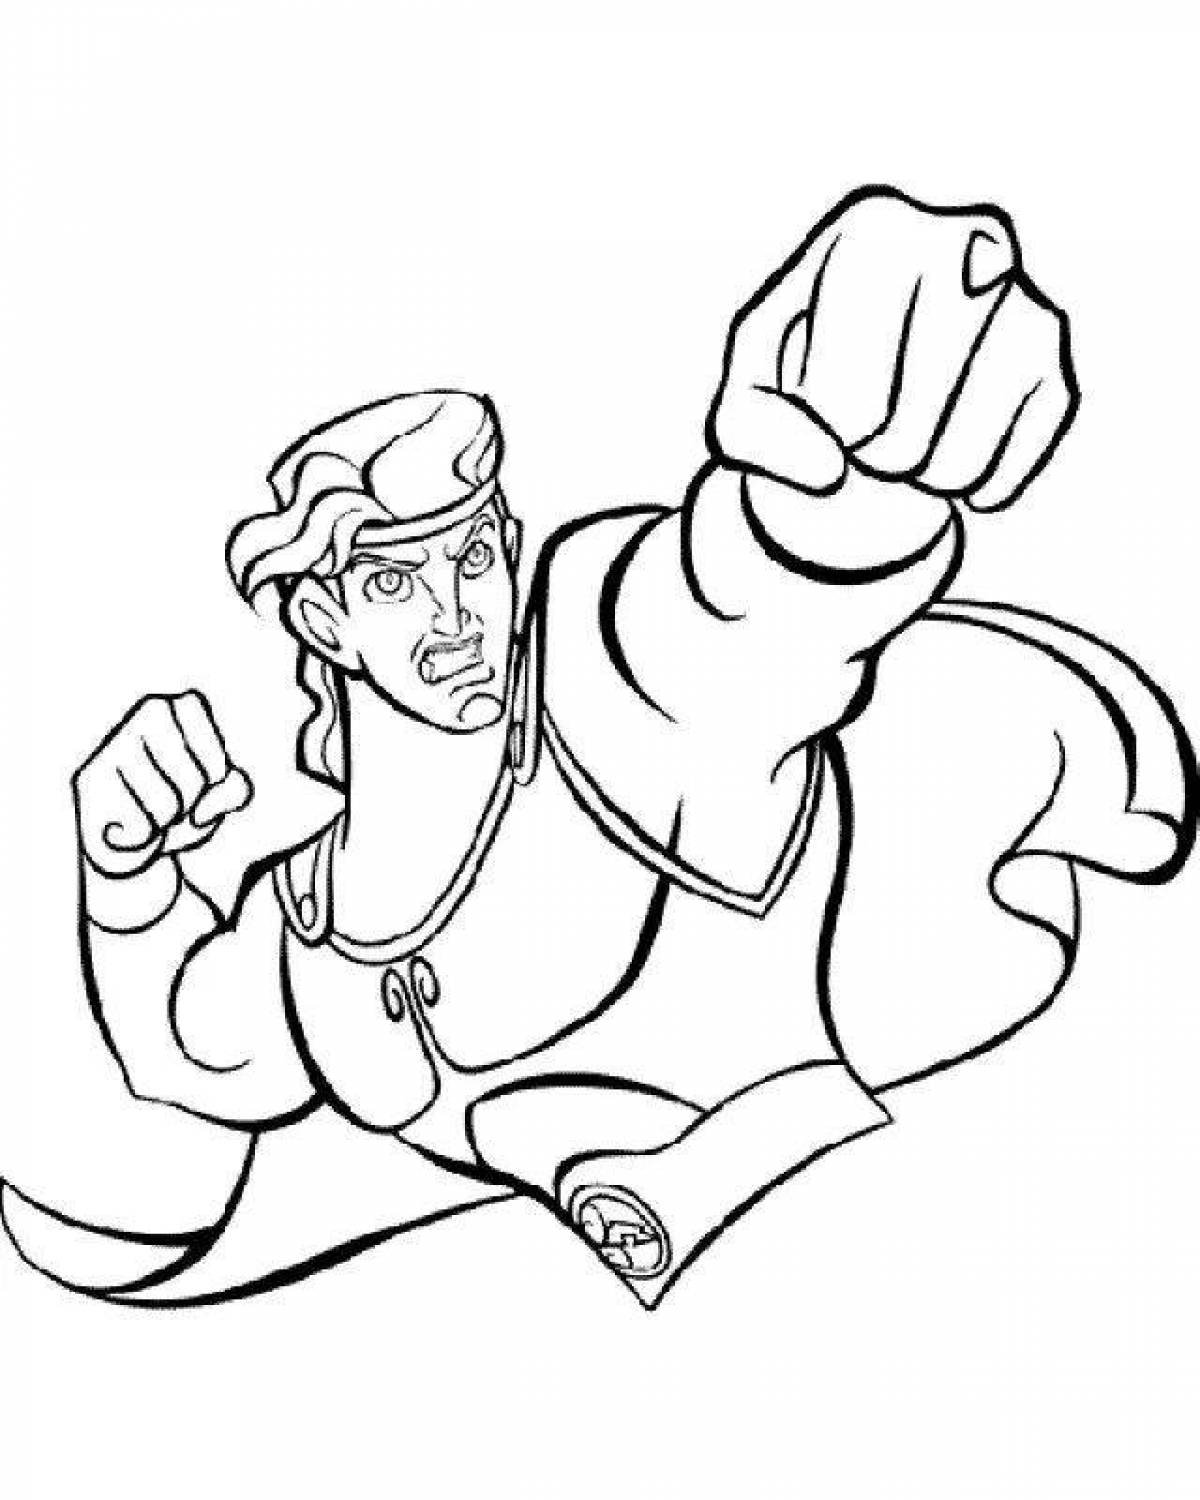 Glorious fighters coloring page